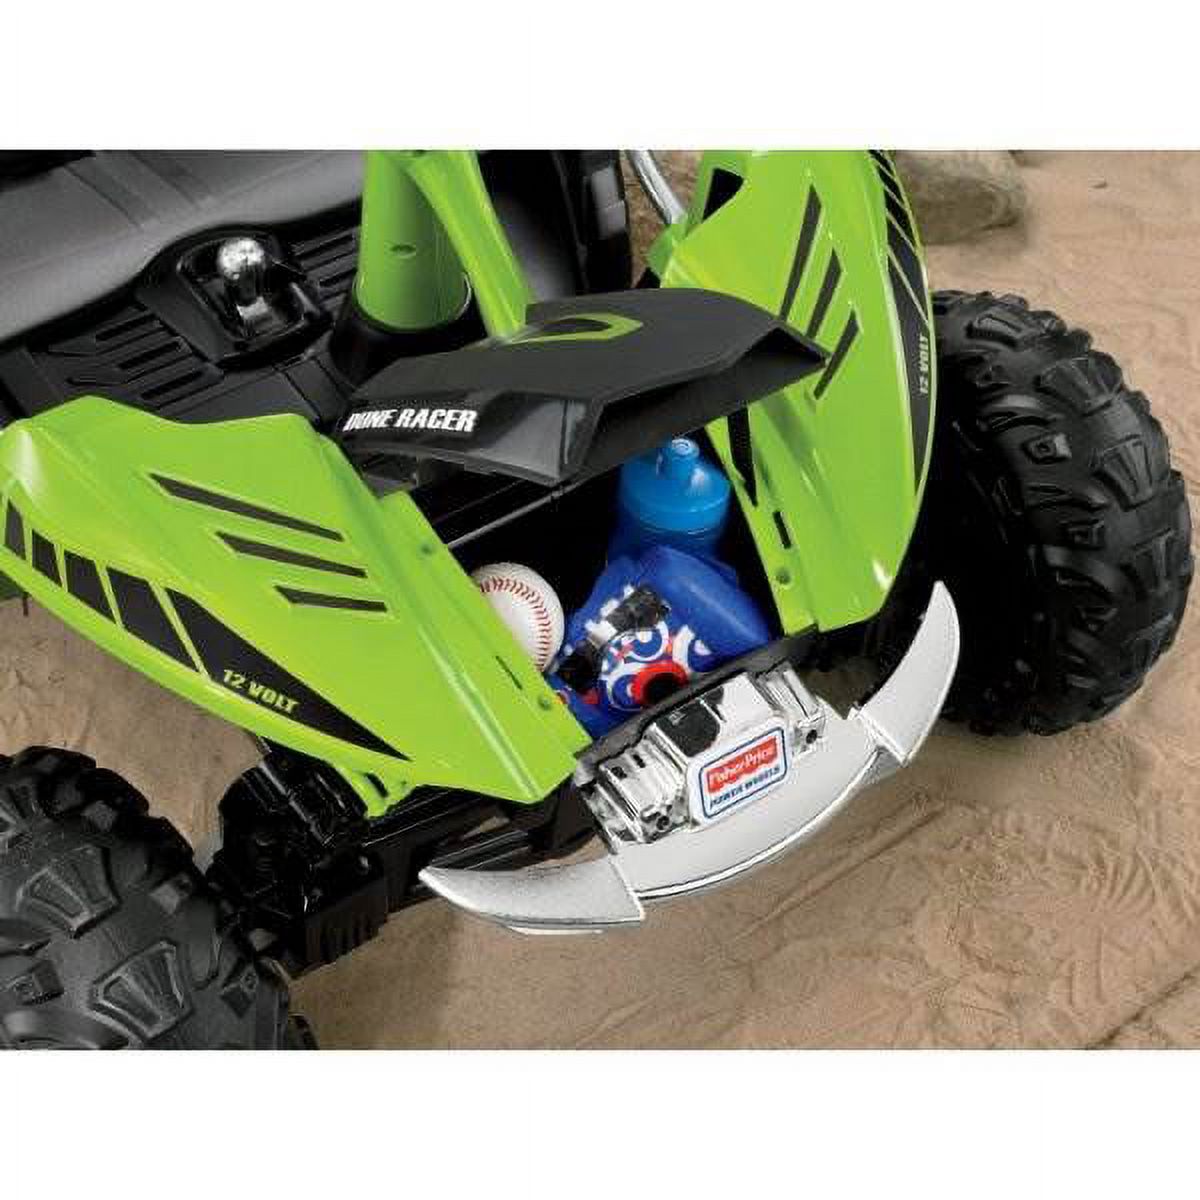 Fisher Price Power Wheel Dune Racer 12V ATV Electric Ride-On | W2602 - image 4 of 6